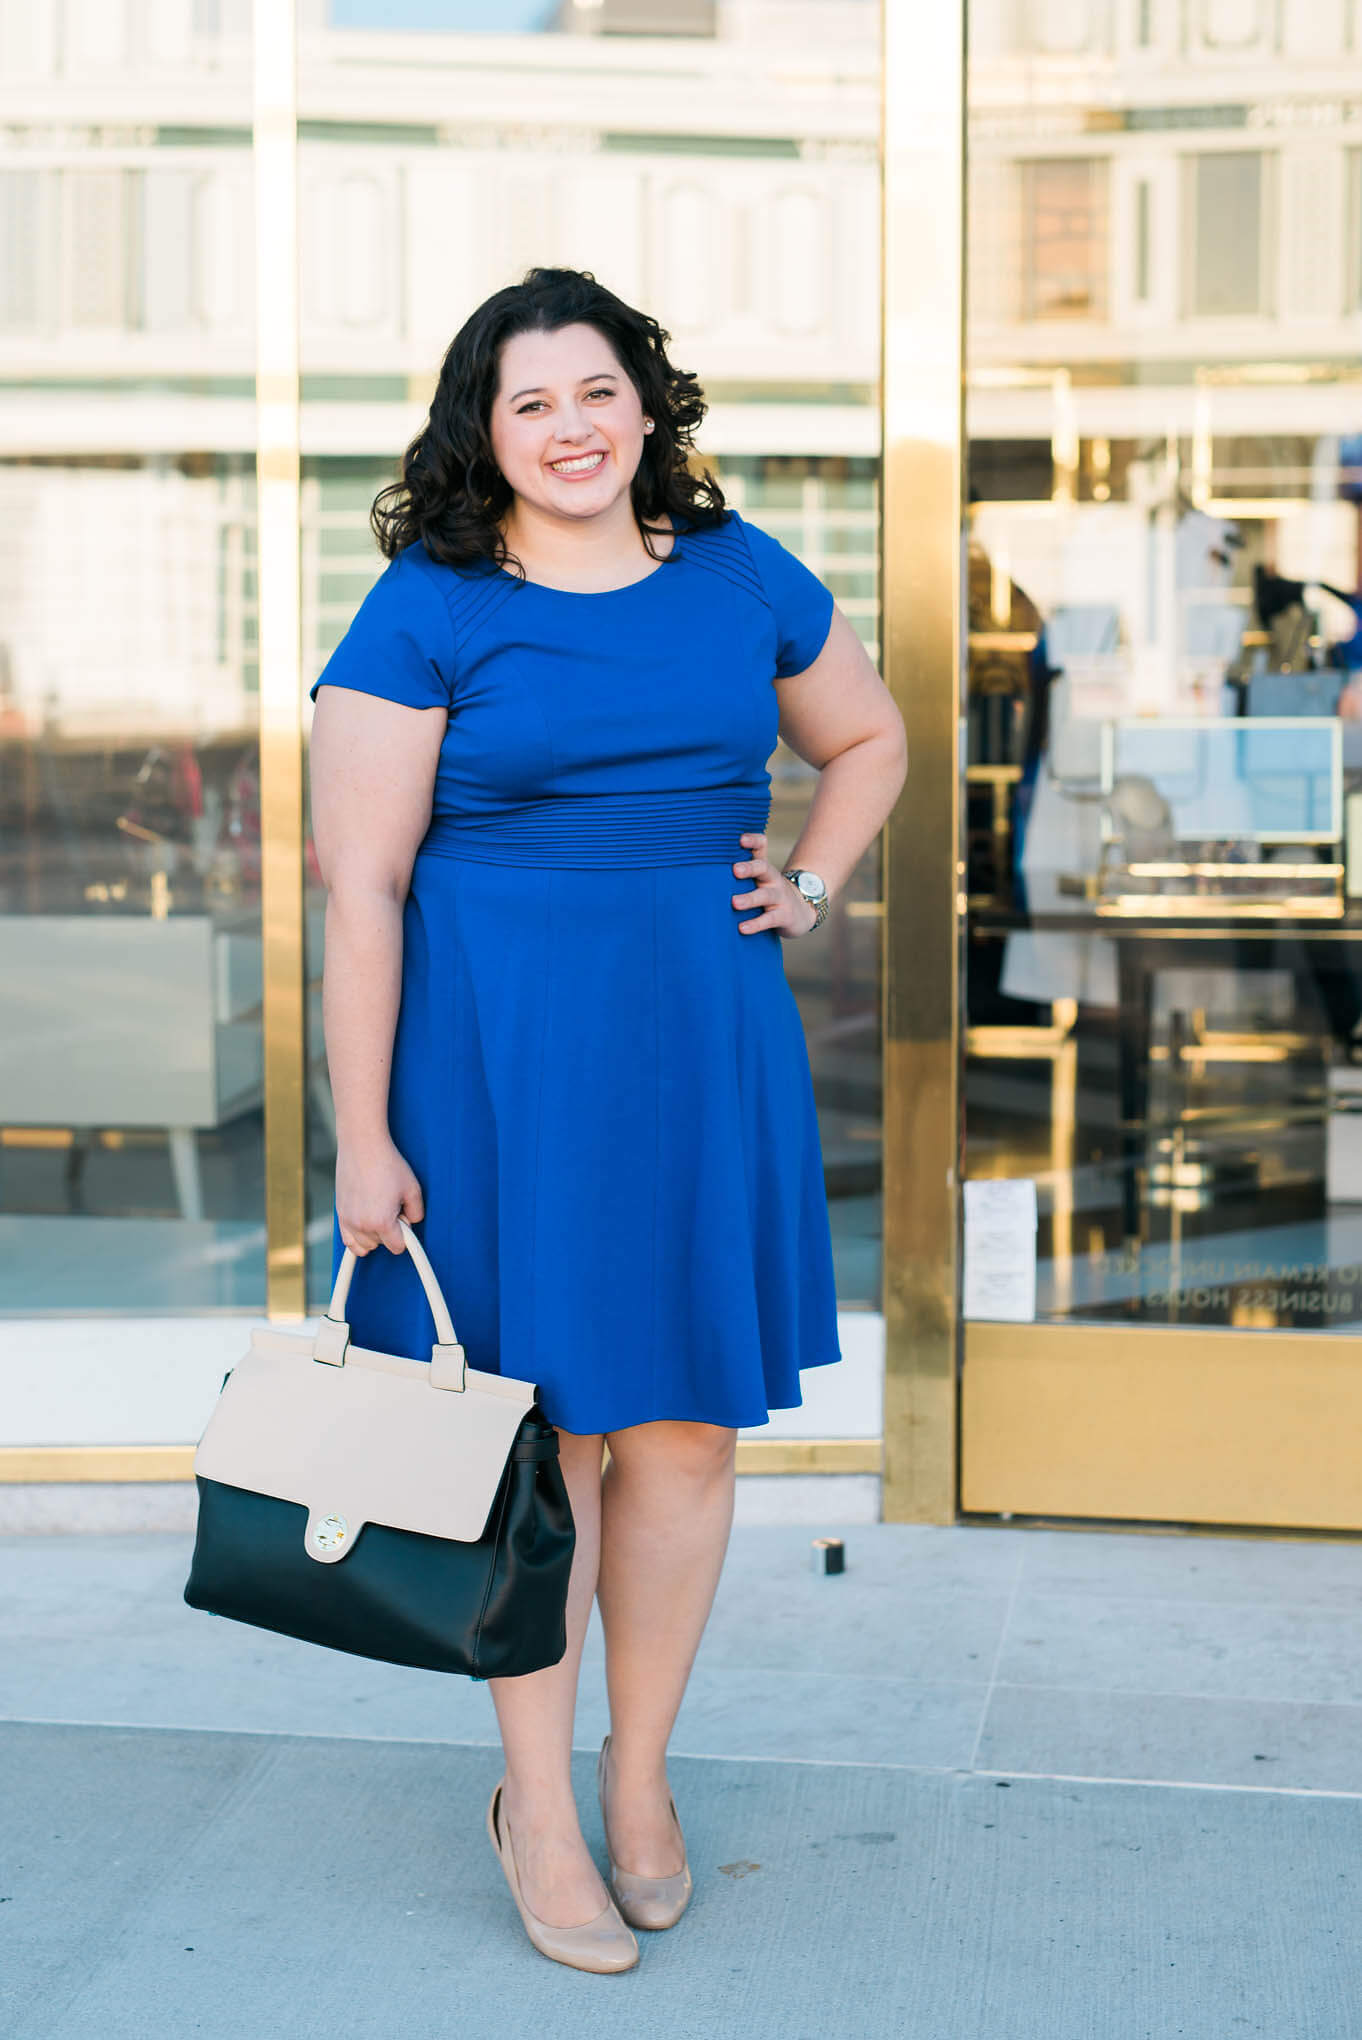 What to wear to work - Something Gold, Something Blue fashion blog - Business casual attire, what to wear to the office, JEMMA work bag, JEMMA bag, best work bag, best bag for travel